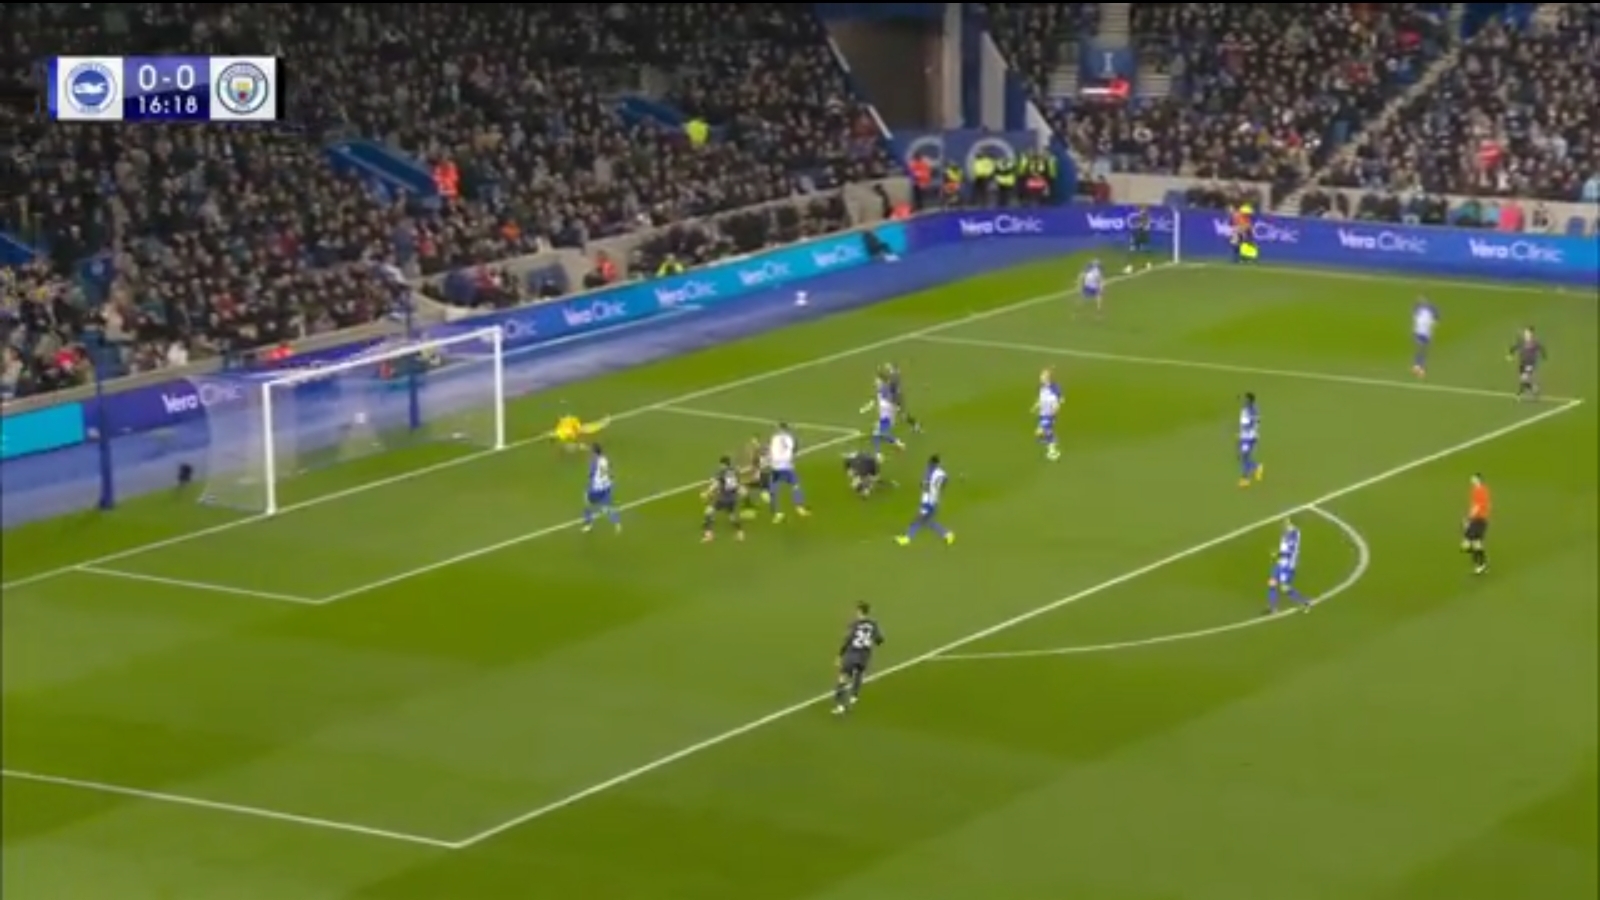 Video: De Bruyne puts Manchester City in the lead with a Van-Persie esque diving header